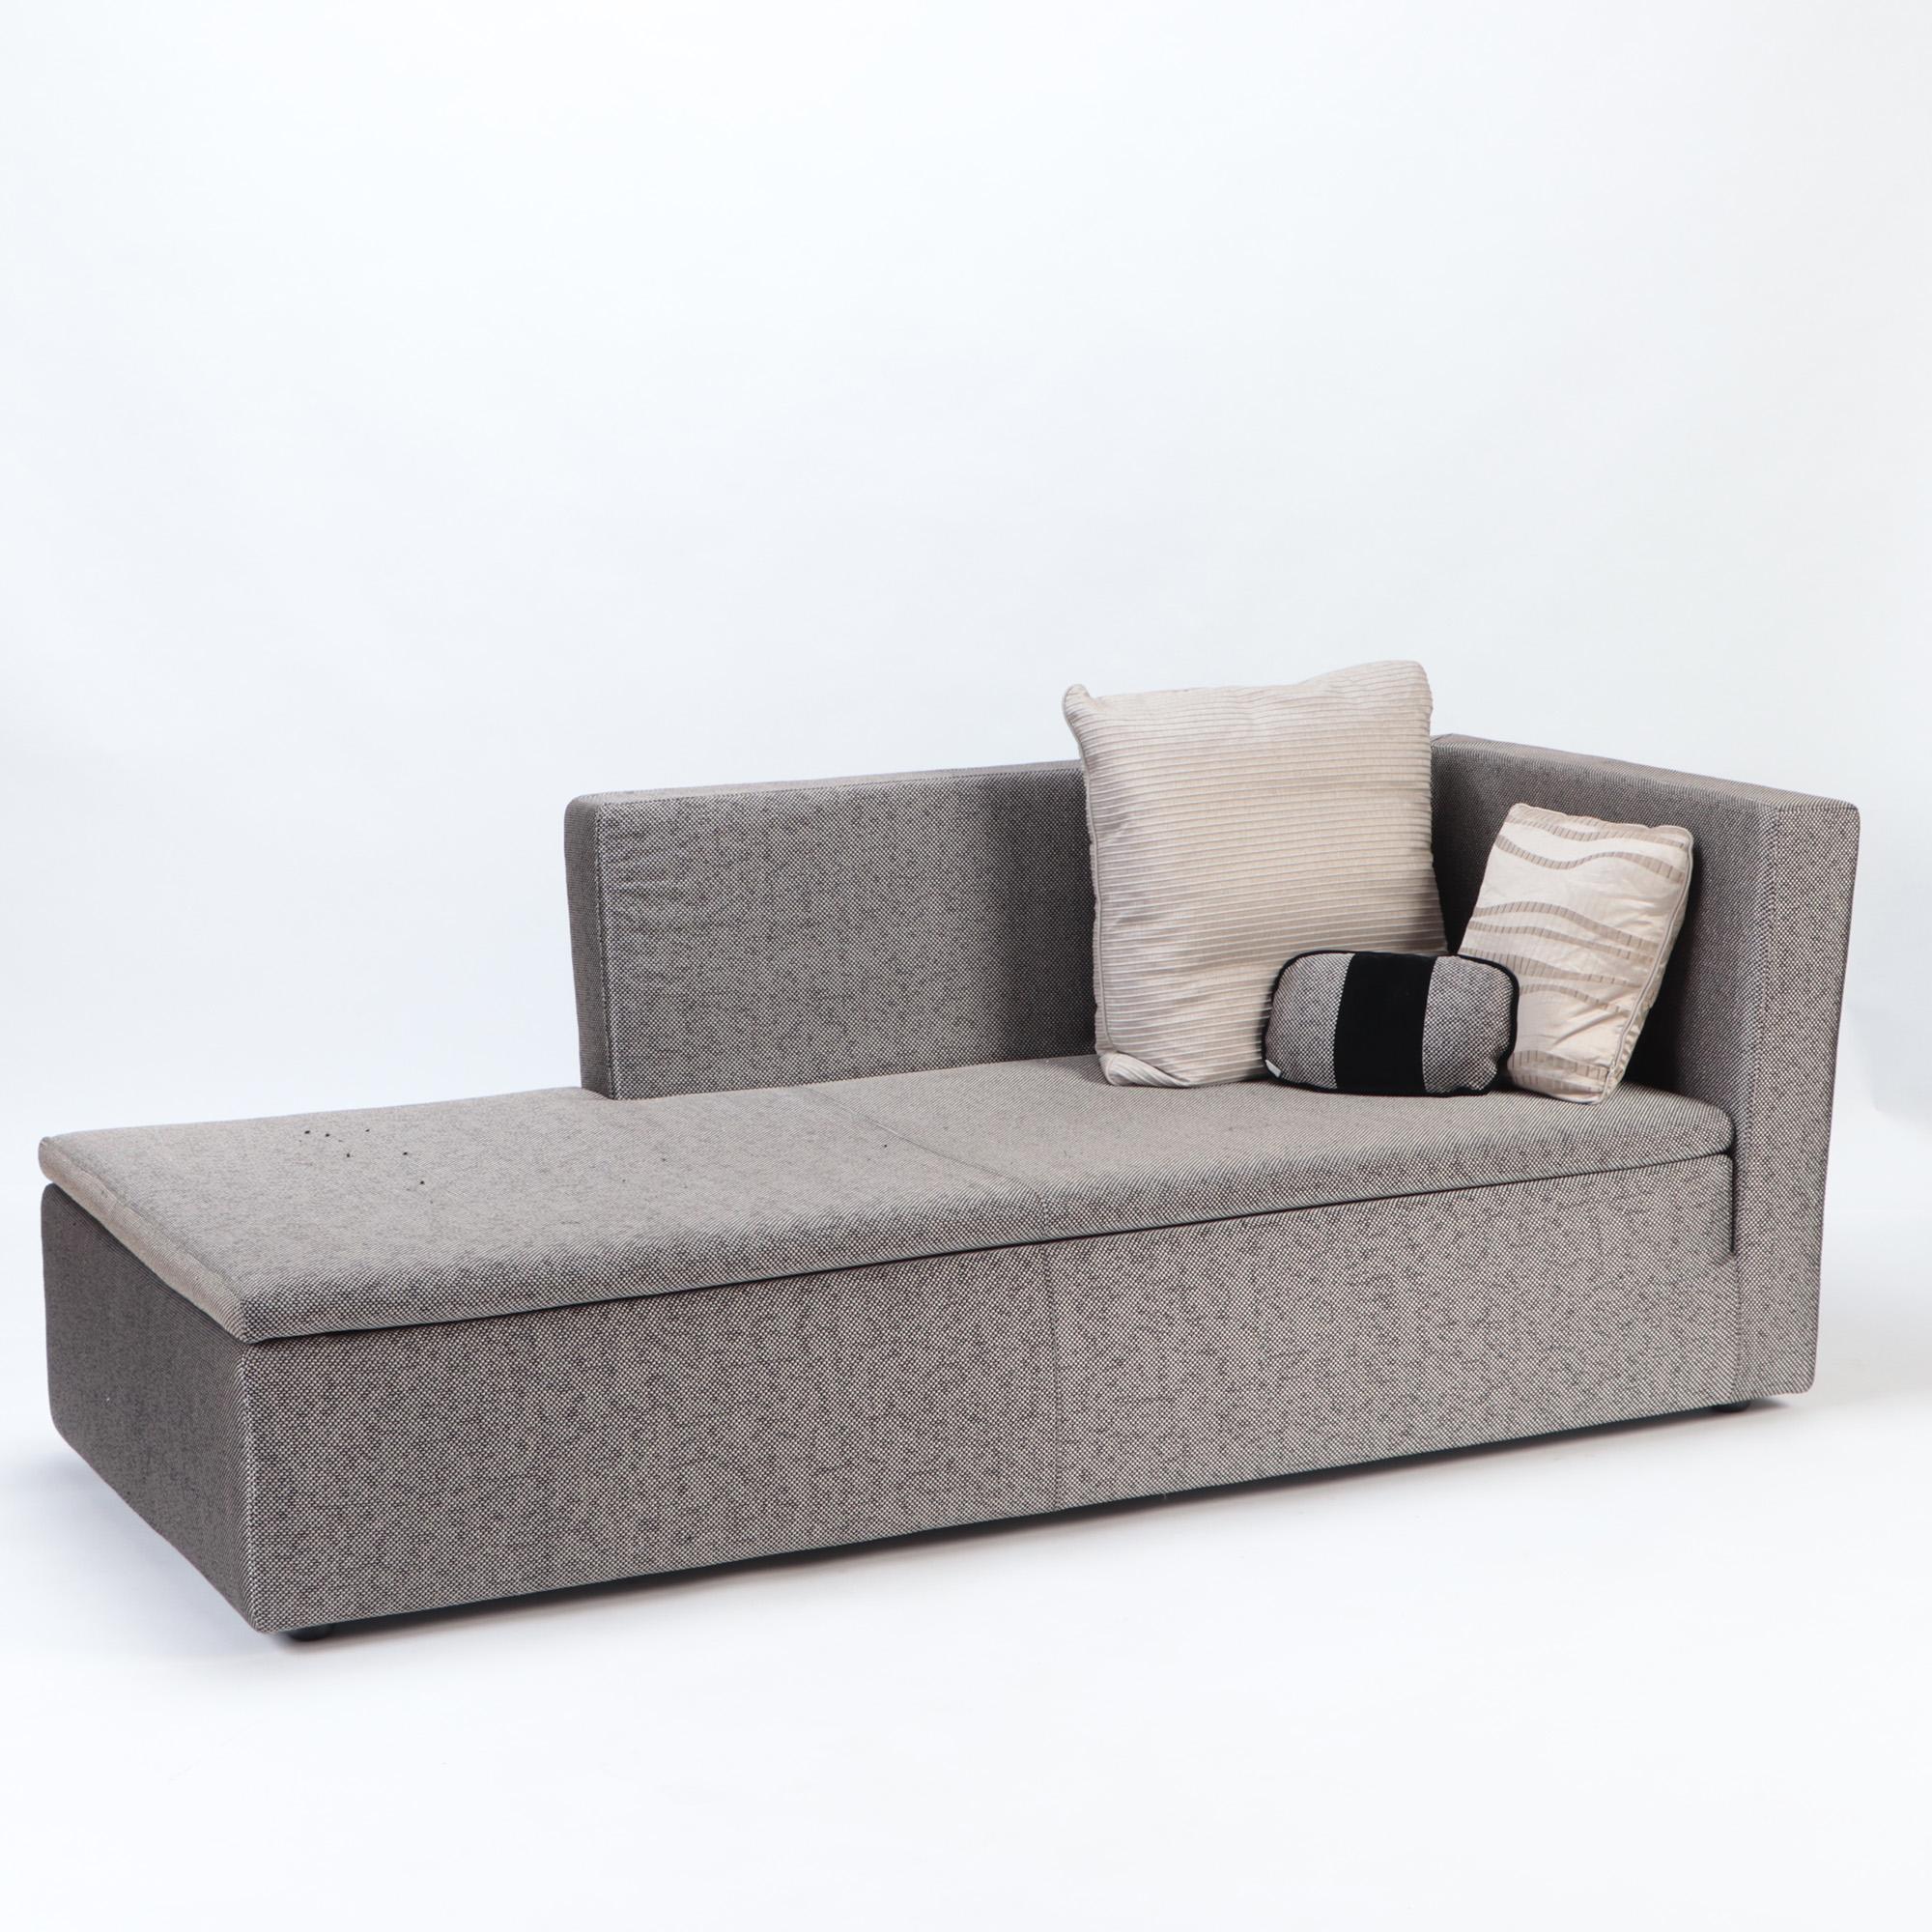 Contemporary Oversized Sofa, Armani Casa. Excellent condition. Could be use a a day bed as well.